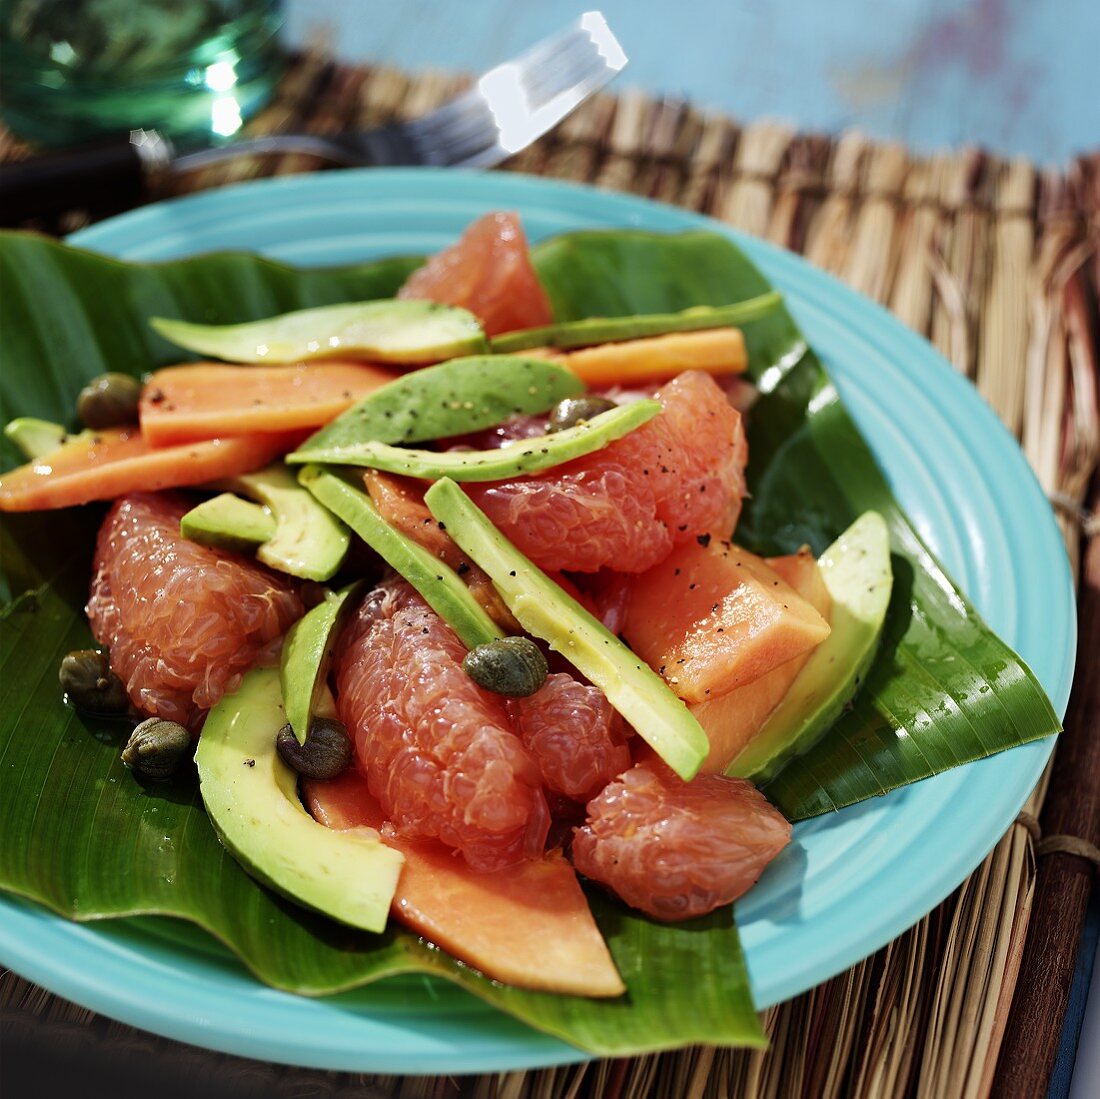 Avocado and grapefruit salad with capers